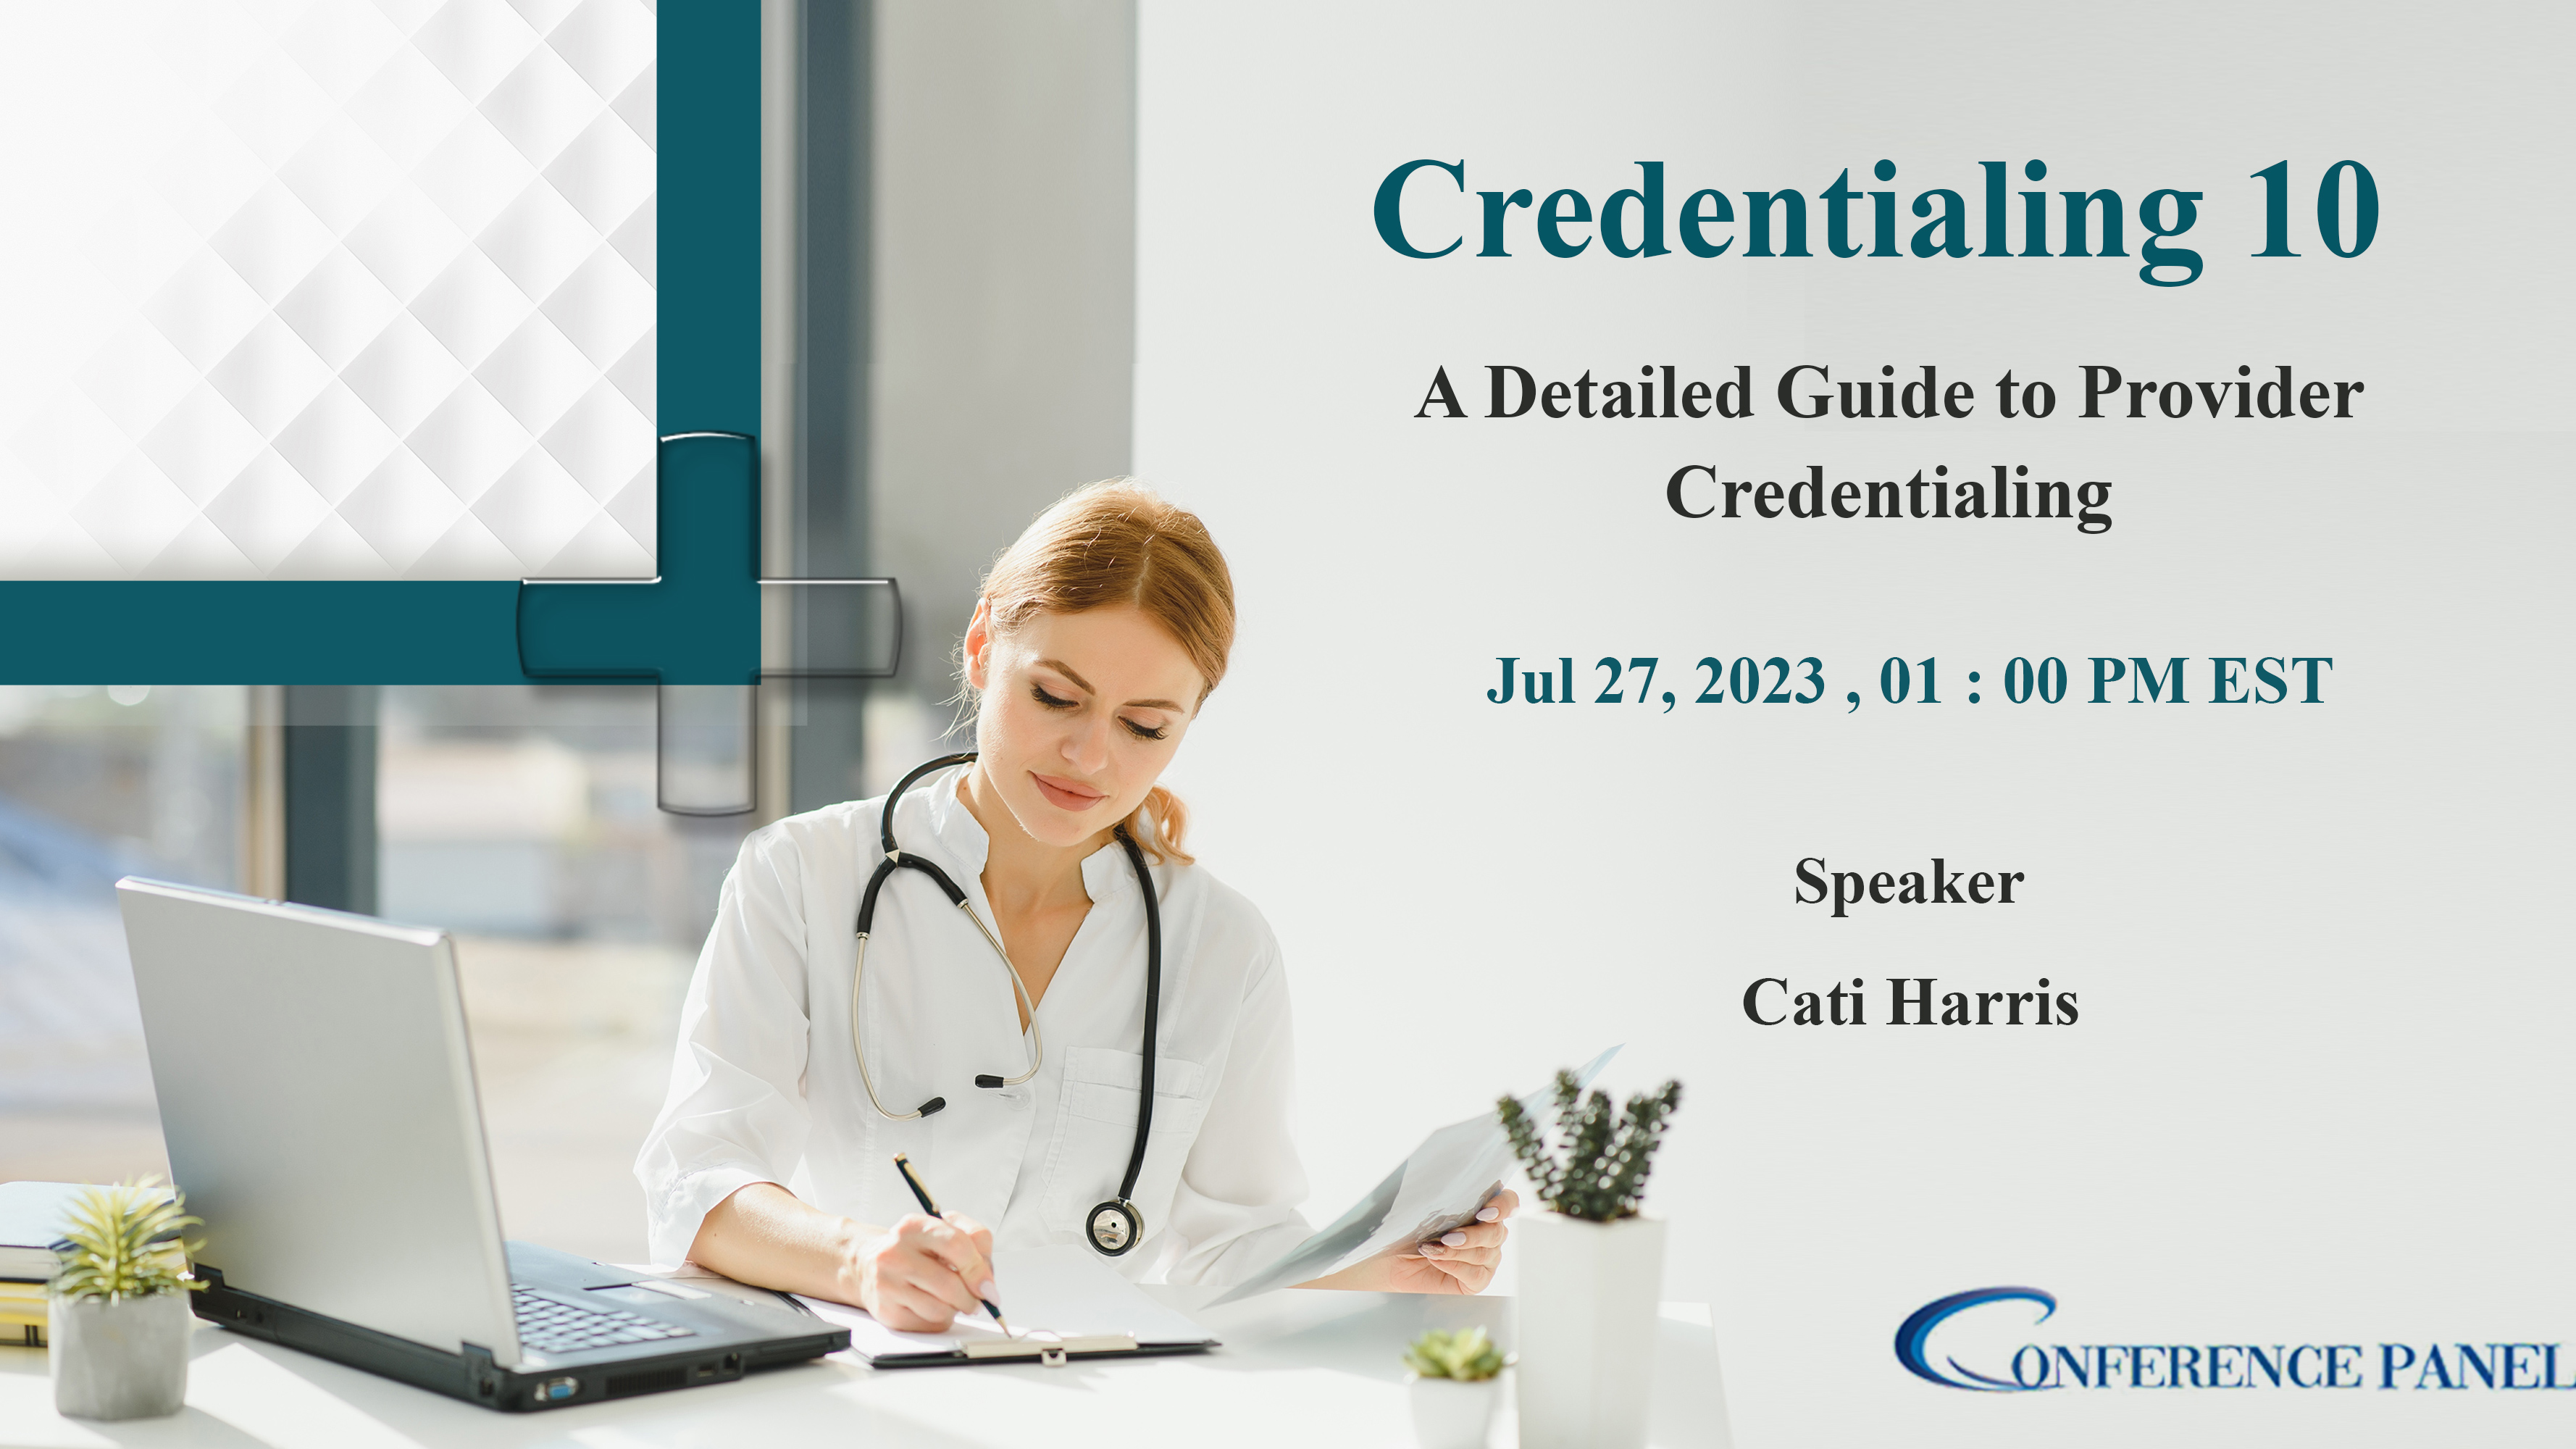 Detailed Guide to Provider Credentialing, Online Event